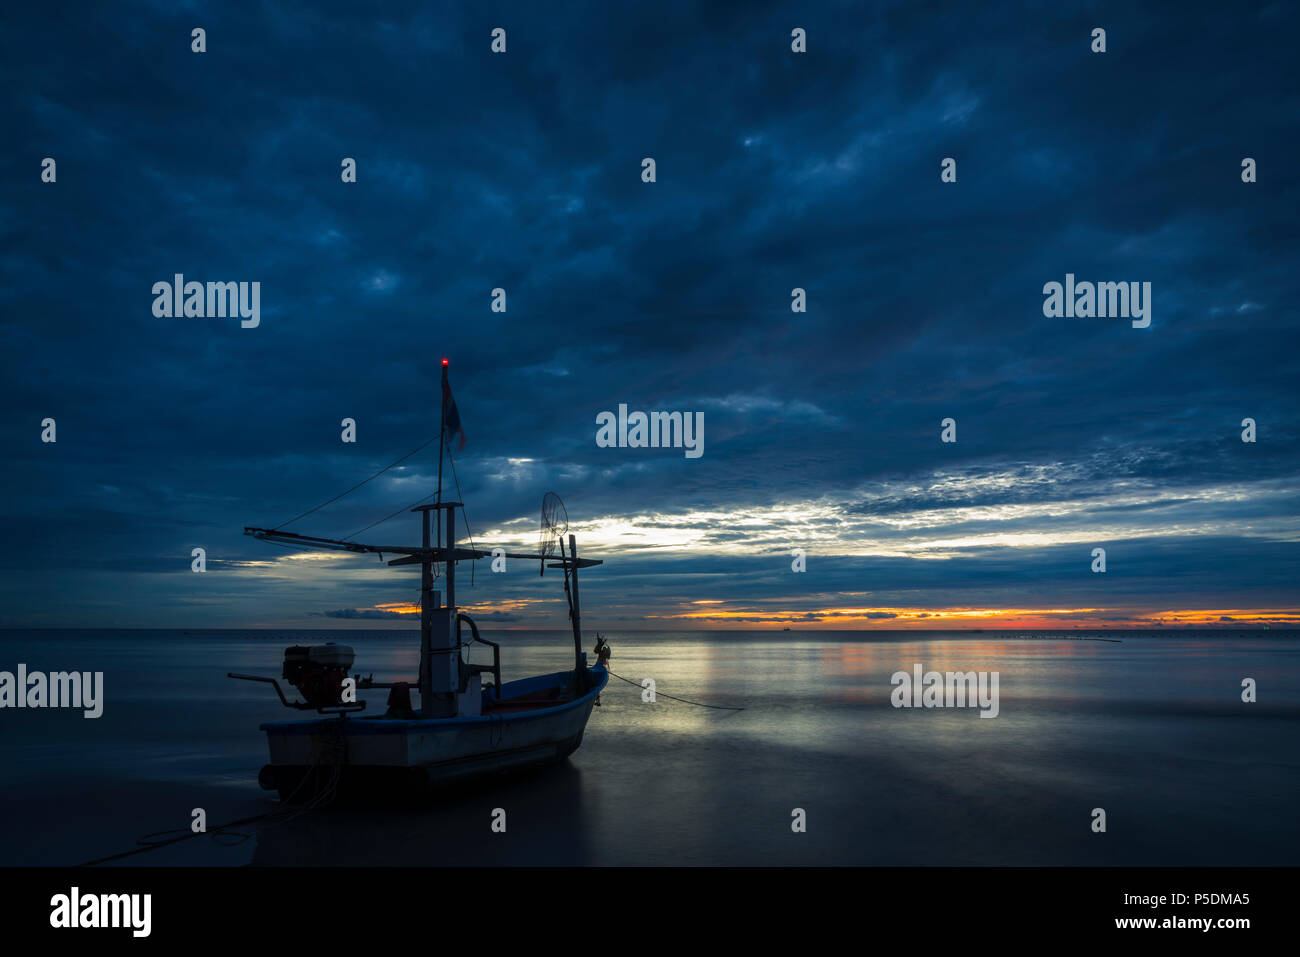 Fish boat rest on a for work in dawn. Stock Photo